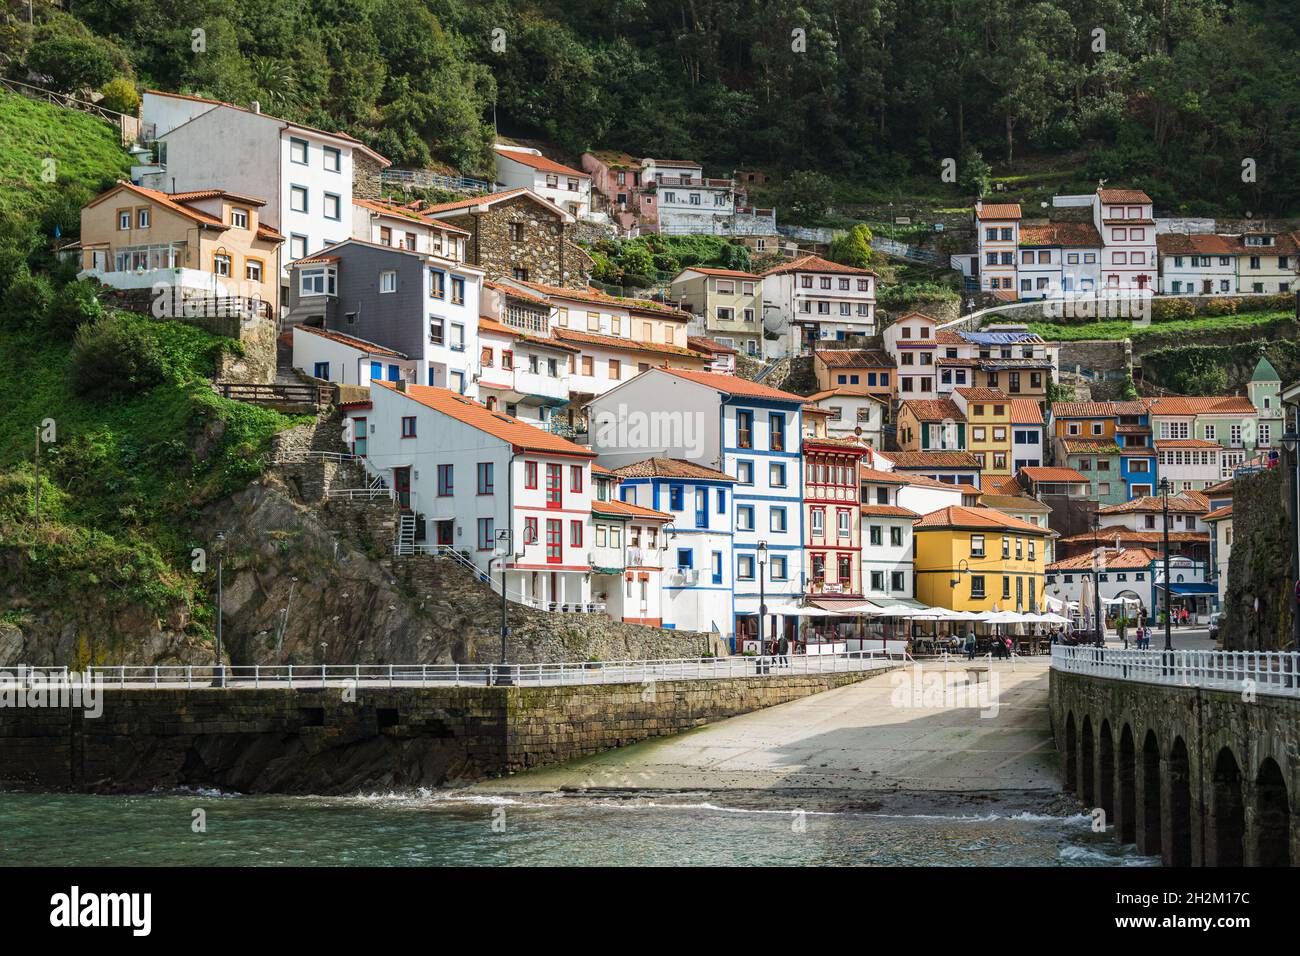 Picturesque fishing village of Cudillero at the Cantabrian Sea coast in Asturias, Spain. Stock Photo